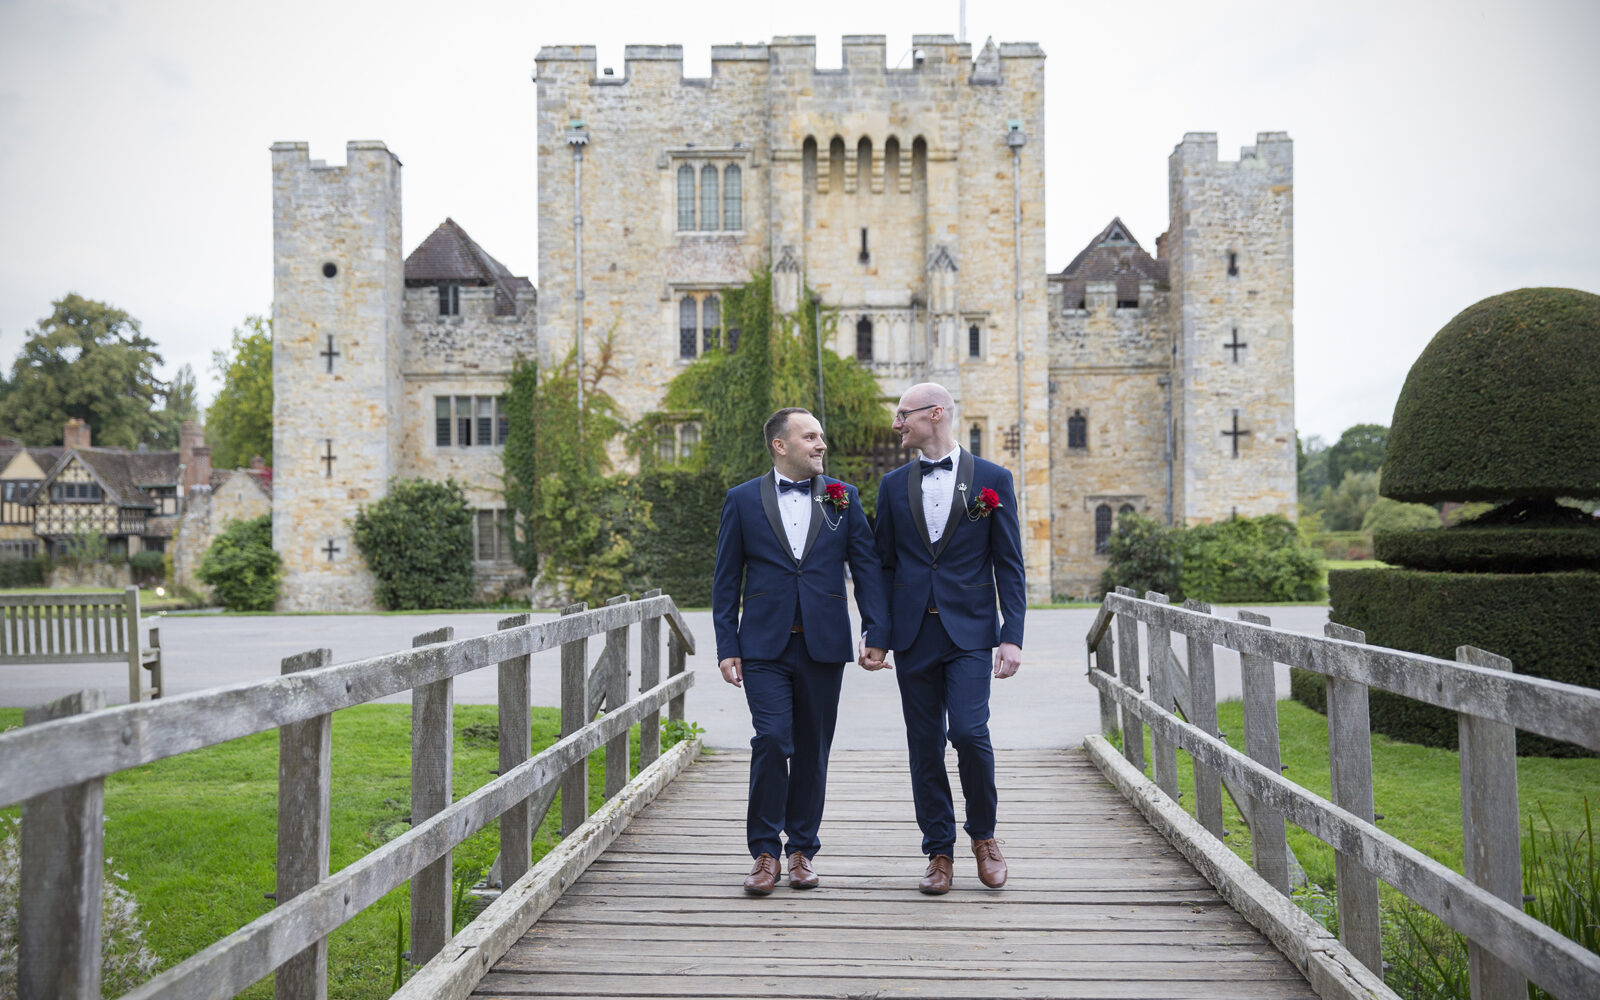 Grooms holding hands walking over bridge at Hever Castle in Kent. Wedding Photography by Victoria Green.